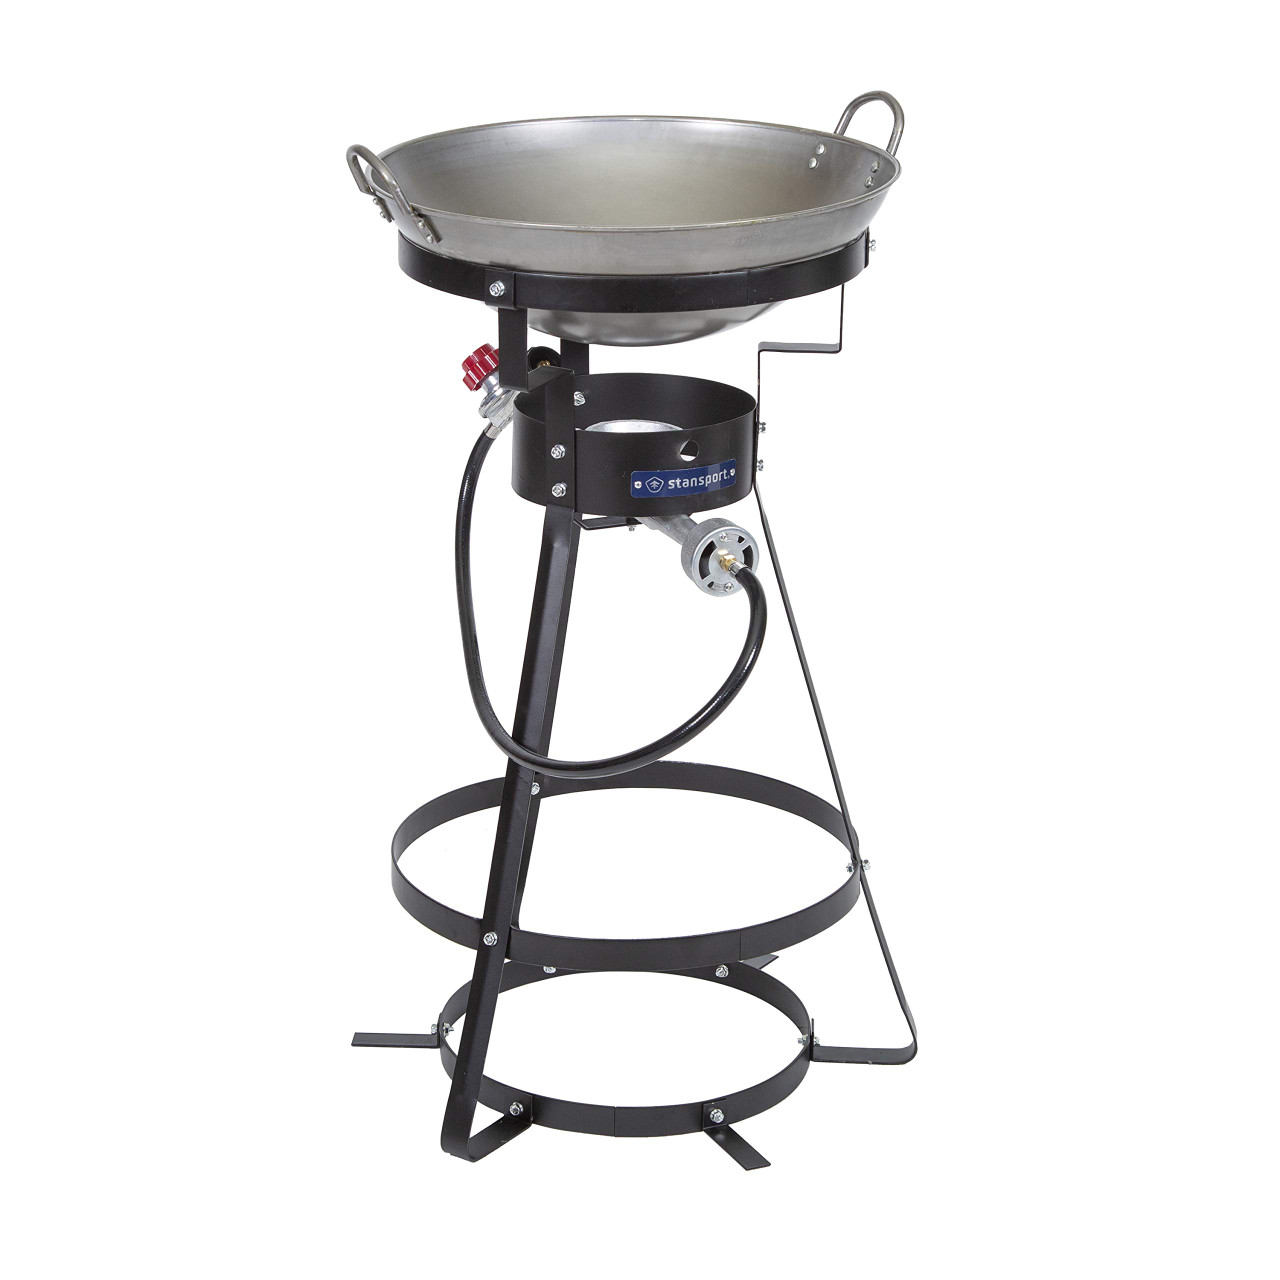 Stansport Outdoor Stove With Wok, One Burner